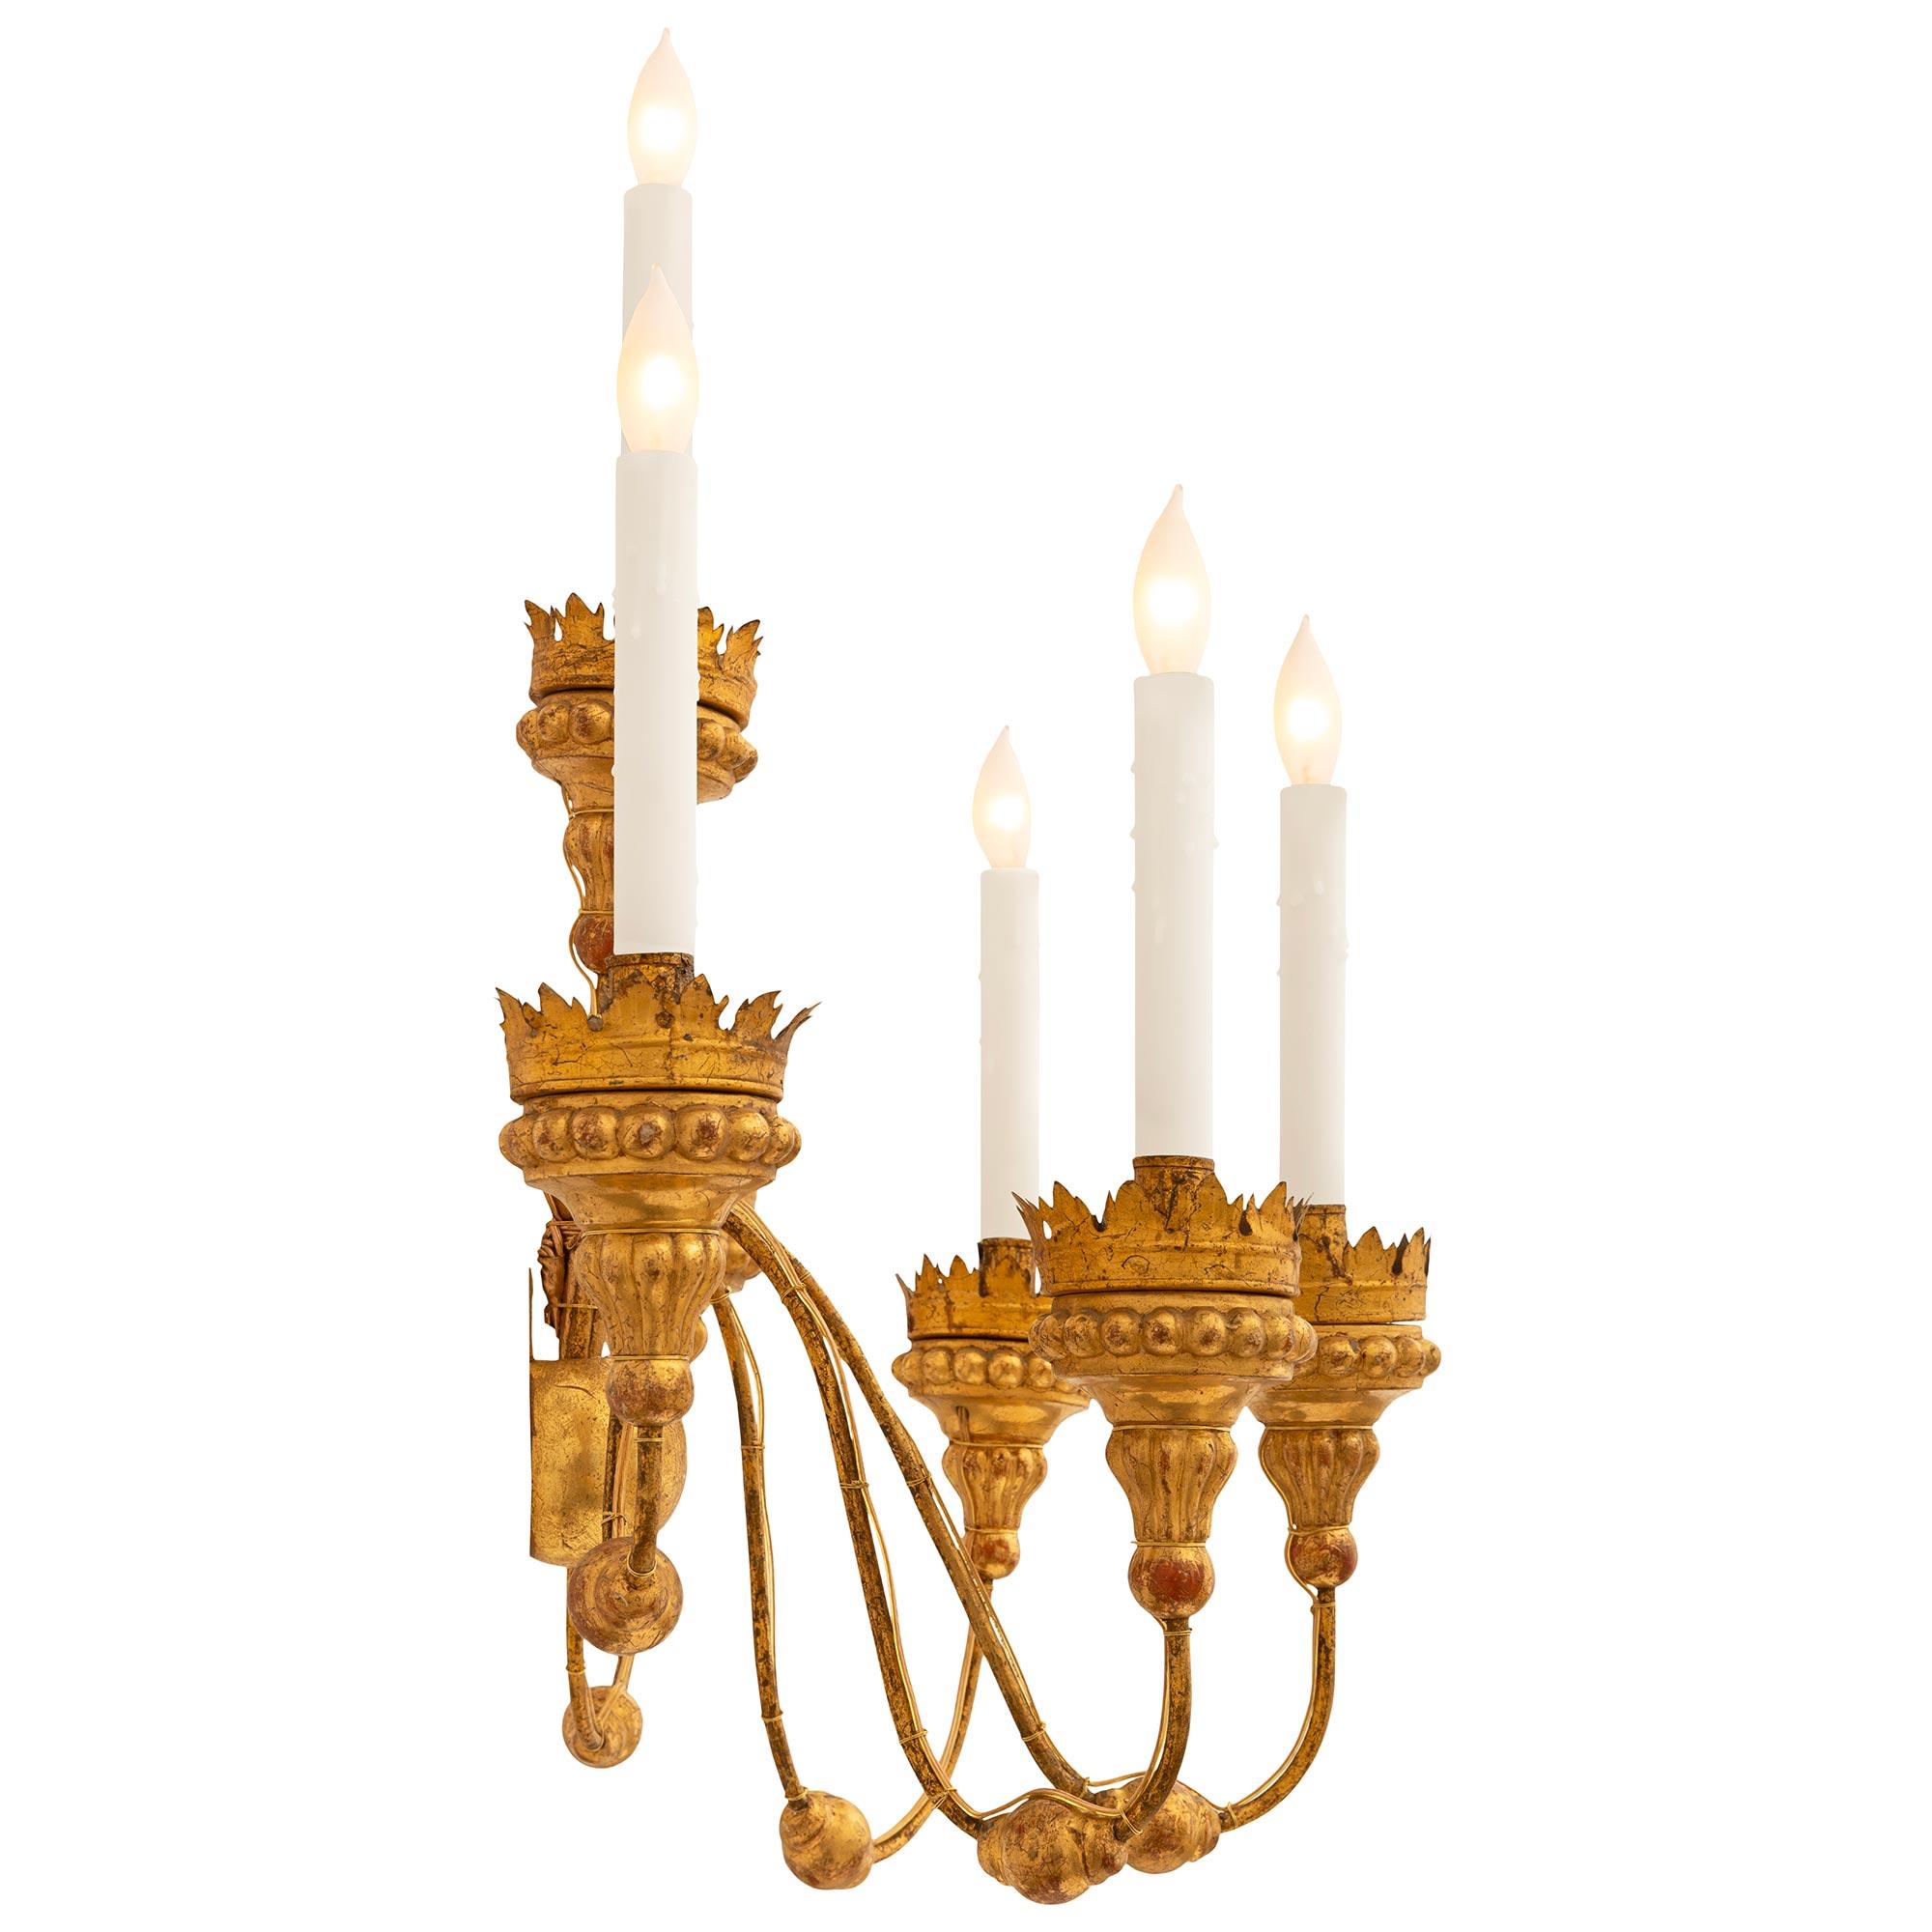  pair of Italian 19th century Louis XVI st. Gilt Metal and Giltwood sconces In Good Condition For Sale In West Palm Beach, FL